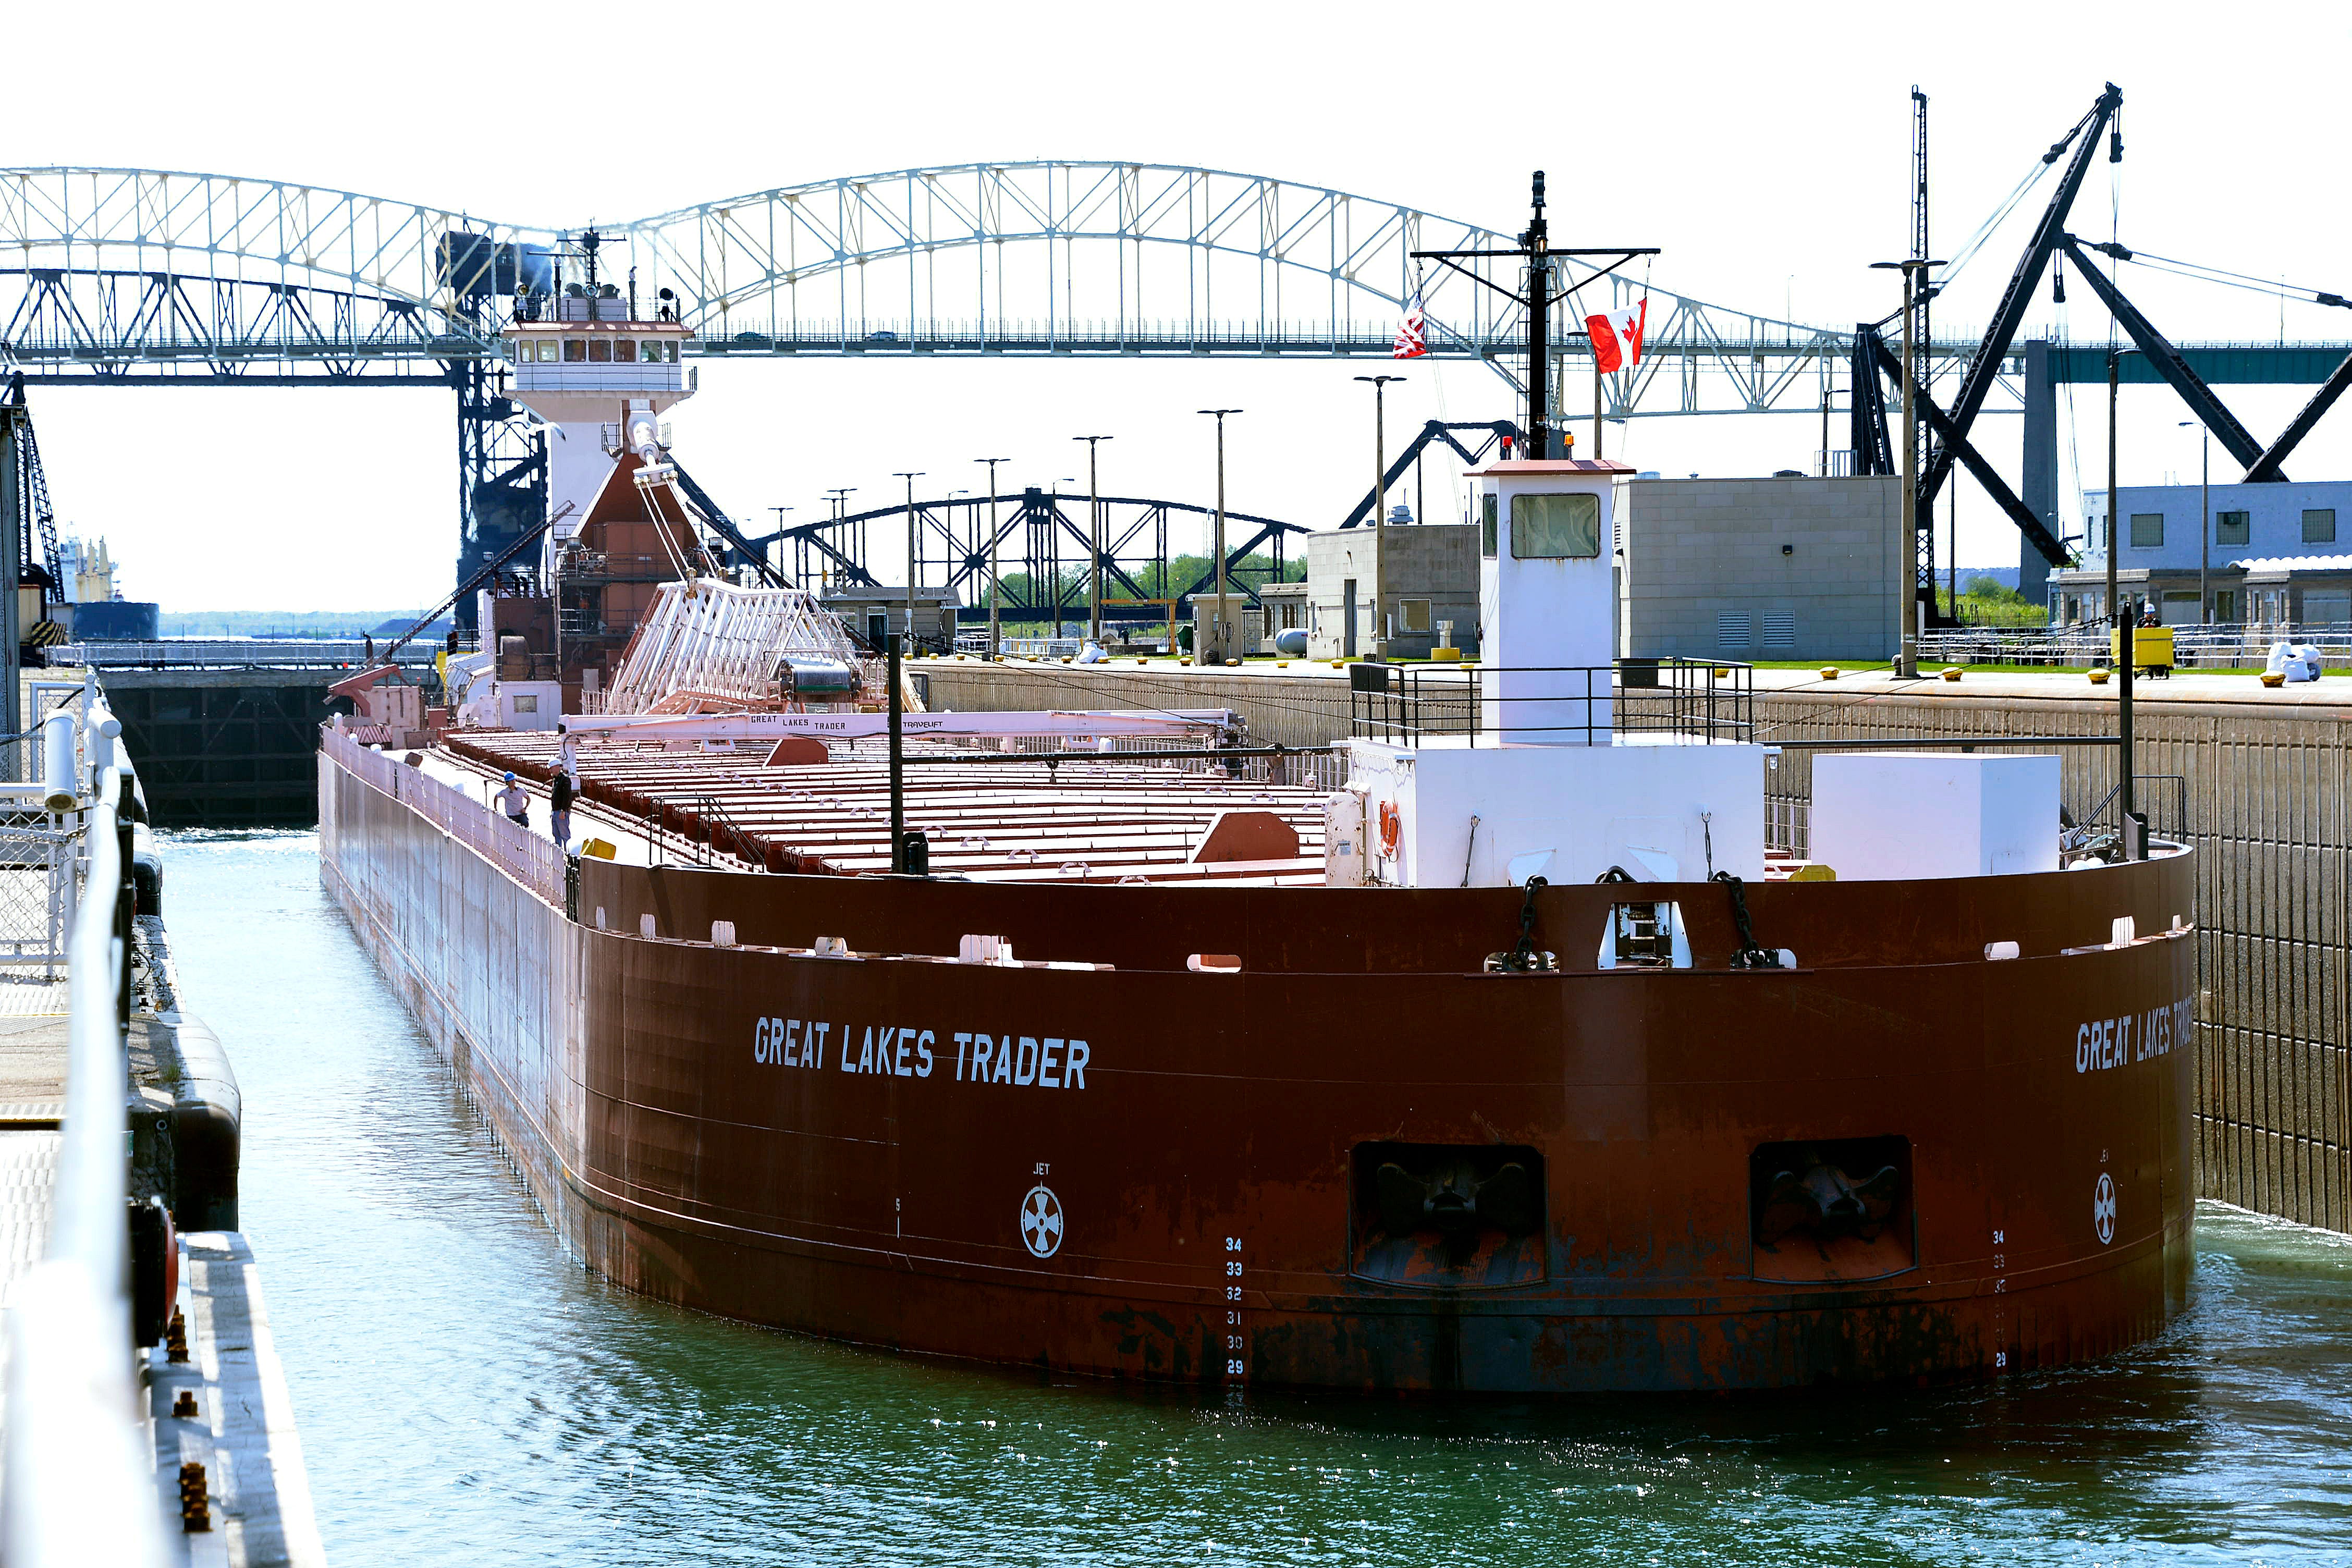 The Great Lakes Trader passes downstream through the Poe Lock in Sault Ste. Marie.